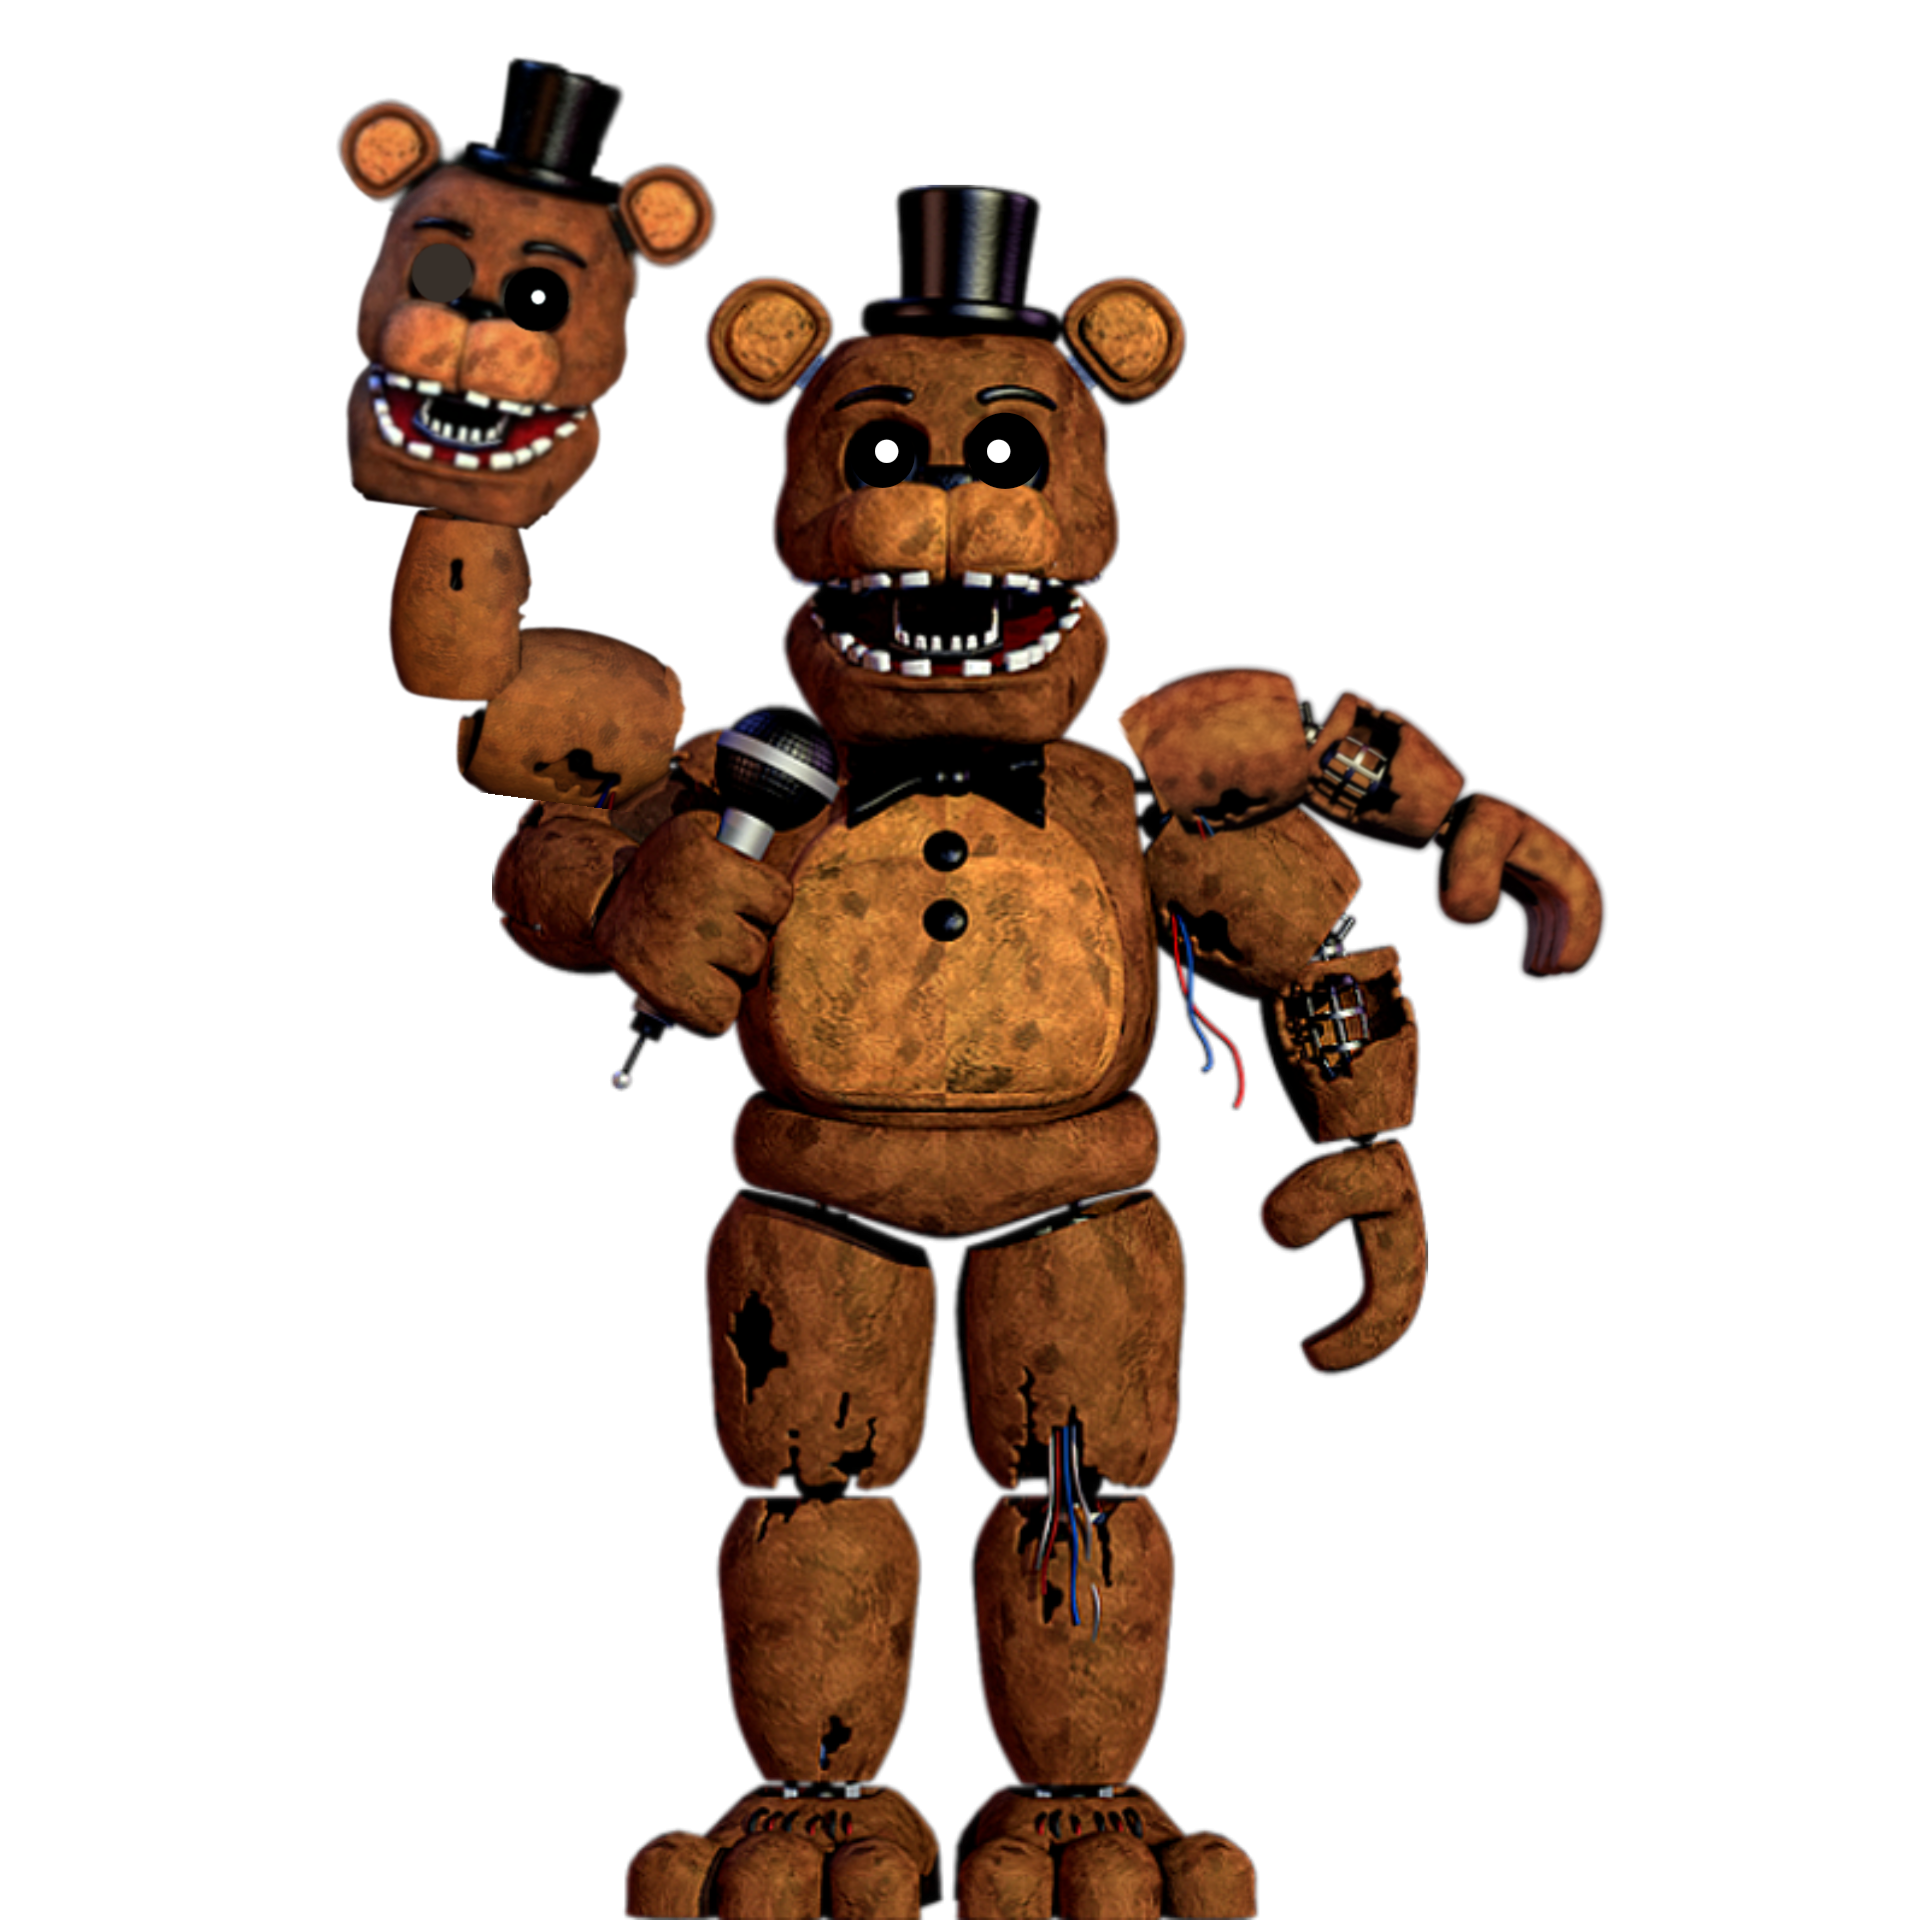 Withered Freddy (FNaF2), Five Nights at Freddy's Wikia